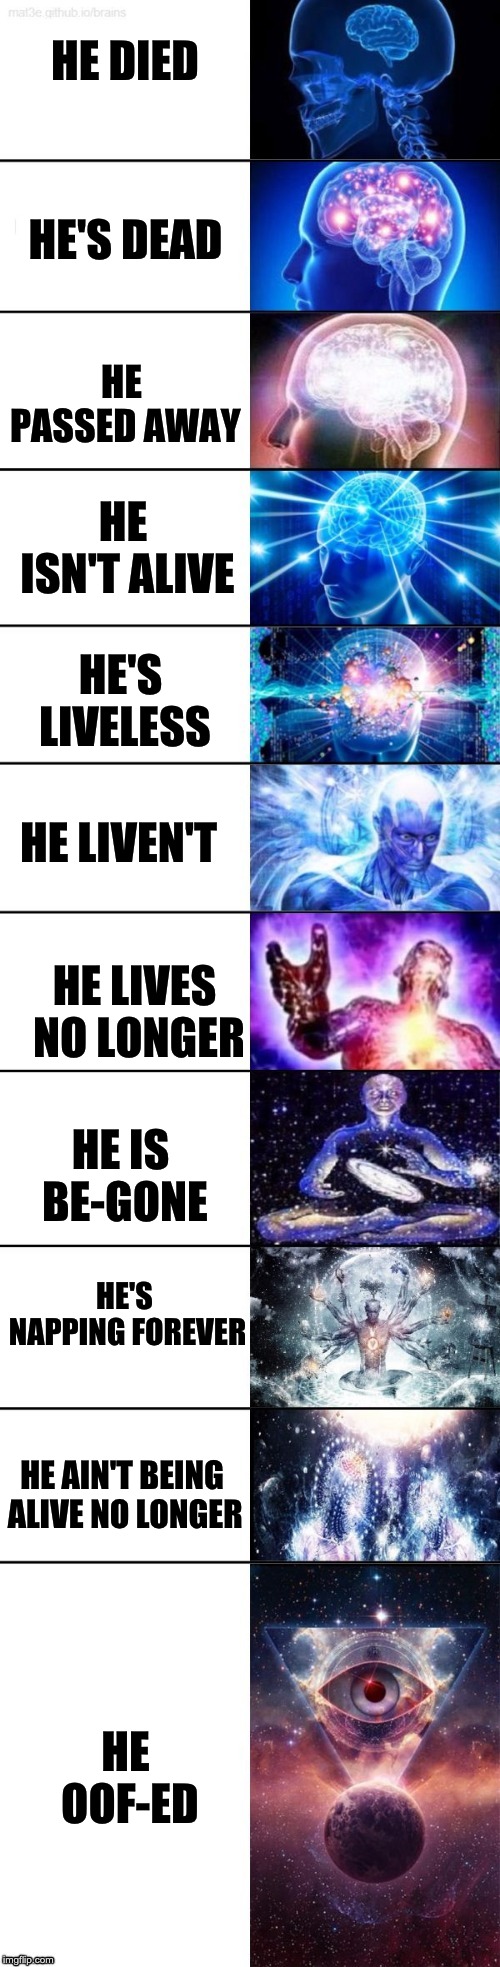 Ultimate ways to say he died By: Random Picture God
 | HE DIED; HE'S DEAD; HE PASSED AWAY; HE ISN'T ALIVE; HE'S LIVELESS; HE LIVEN'T; HE LIVES NO LONGER; HE IS BE-GONE; HE'S NAPPING FOREVER; HE AIN'T BEING ALIVE NO LONGER; HE OOF-ED | image tagged in life,oof,hedied,random,funny,glorious | made w/ Imgflip meme maker